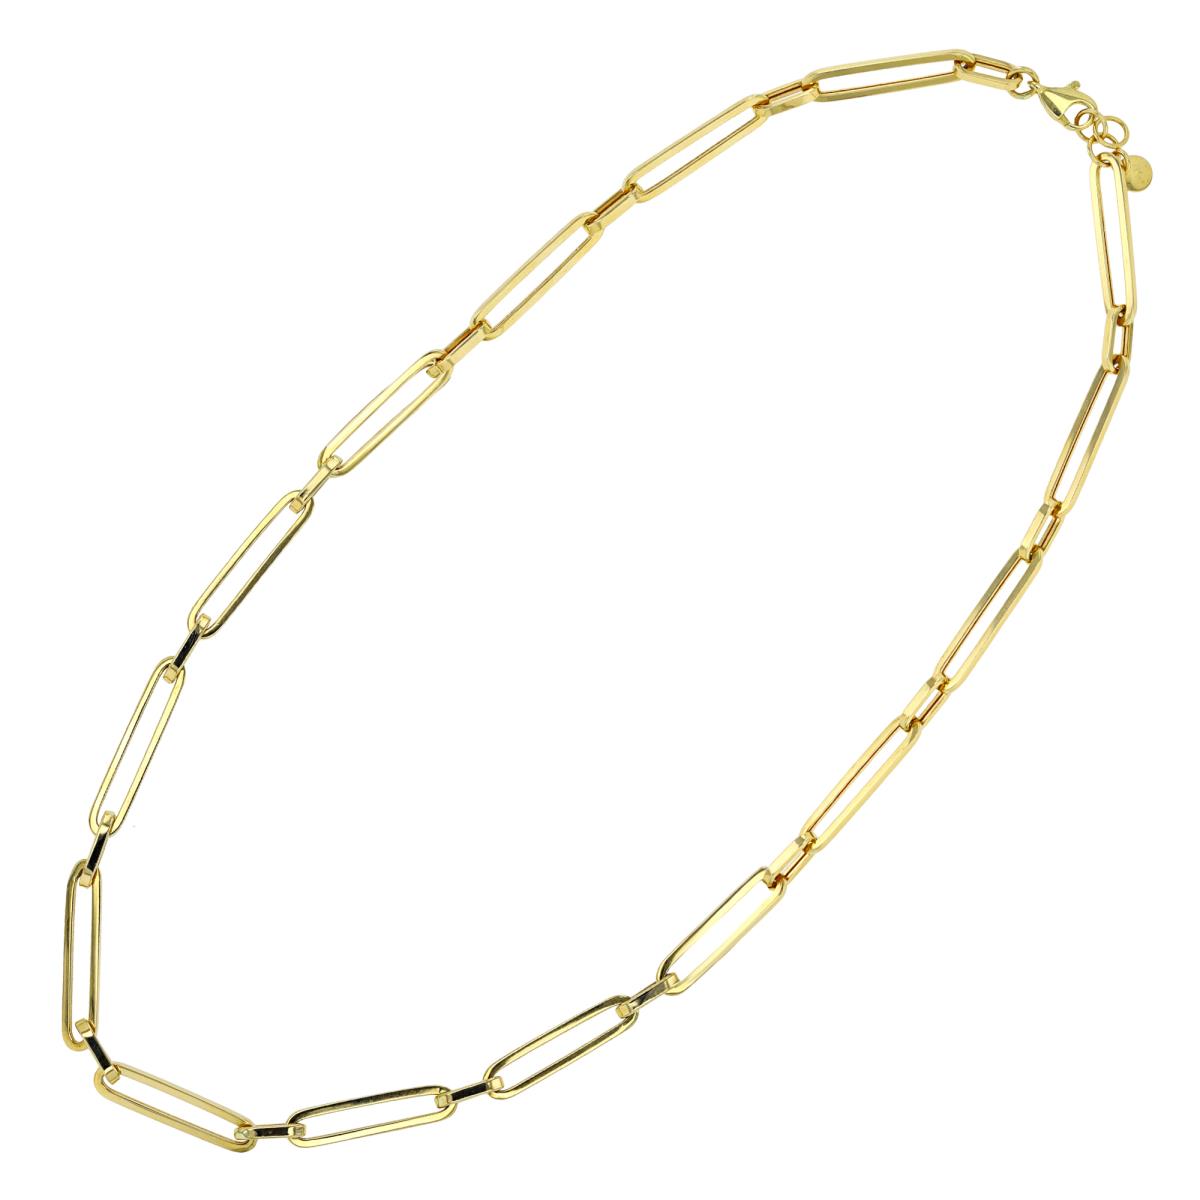 14K Yellow Gold Alternating Link Paperclip 8.5" Chain Bracelet